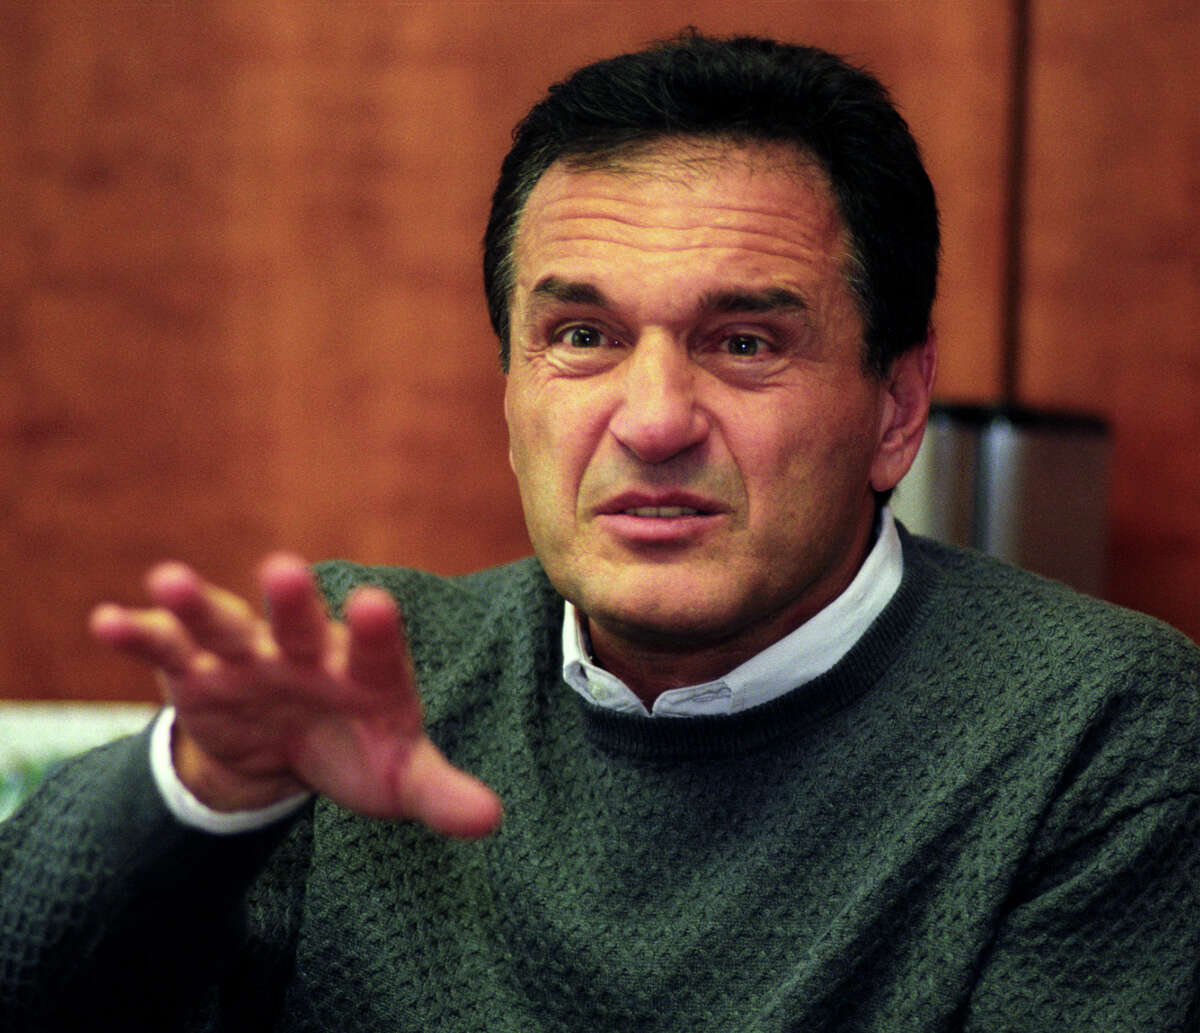 Fred DeLuca, CEO of Subway and supporter of the Schaghticoke Indian Tribe in an interview on March 3, 2004.